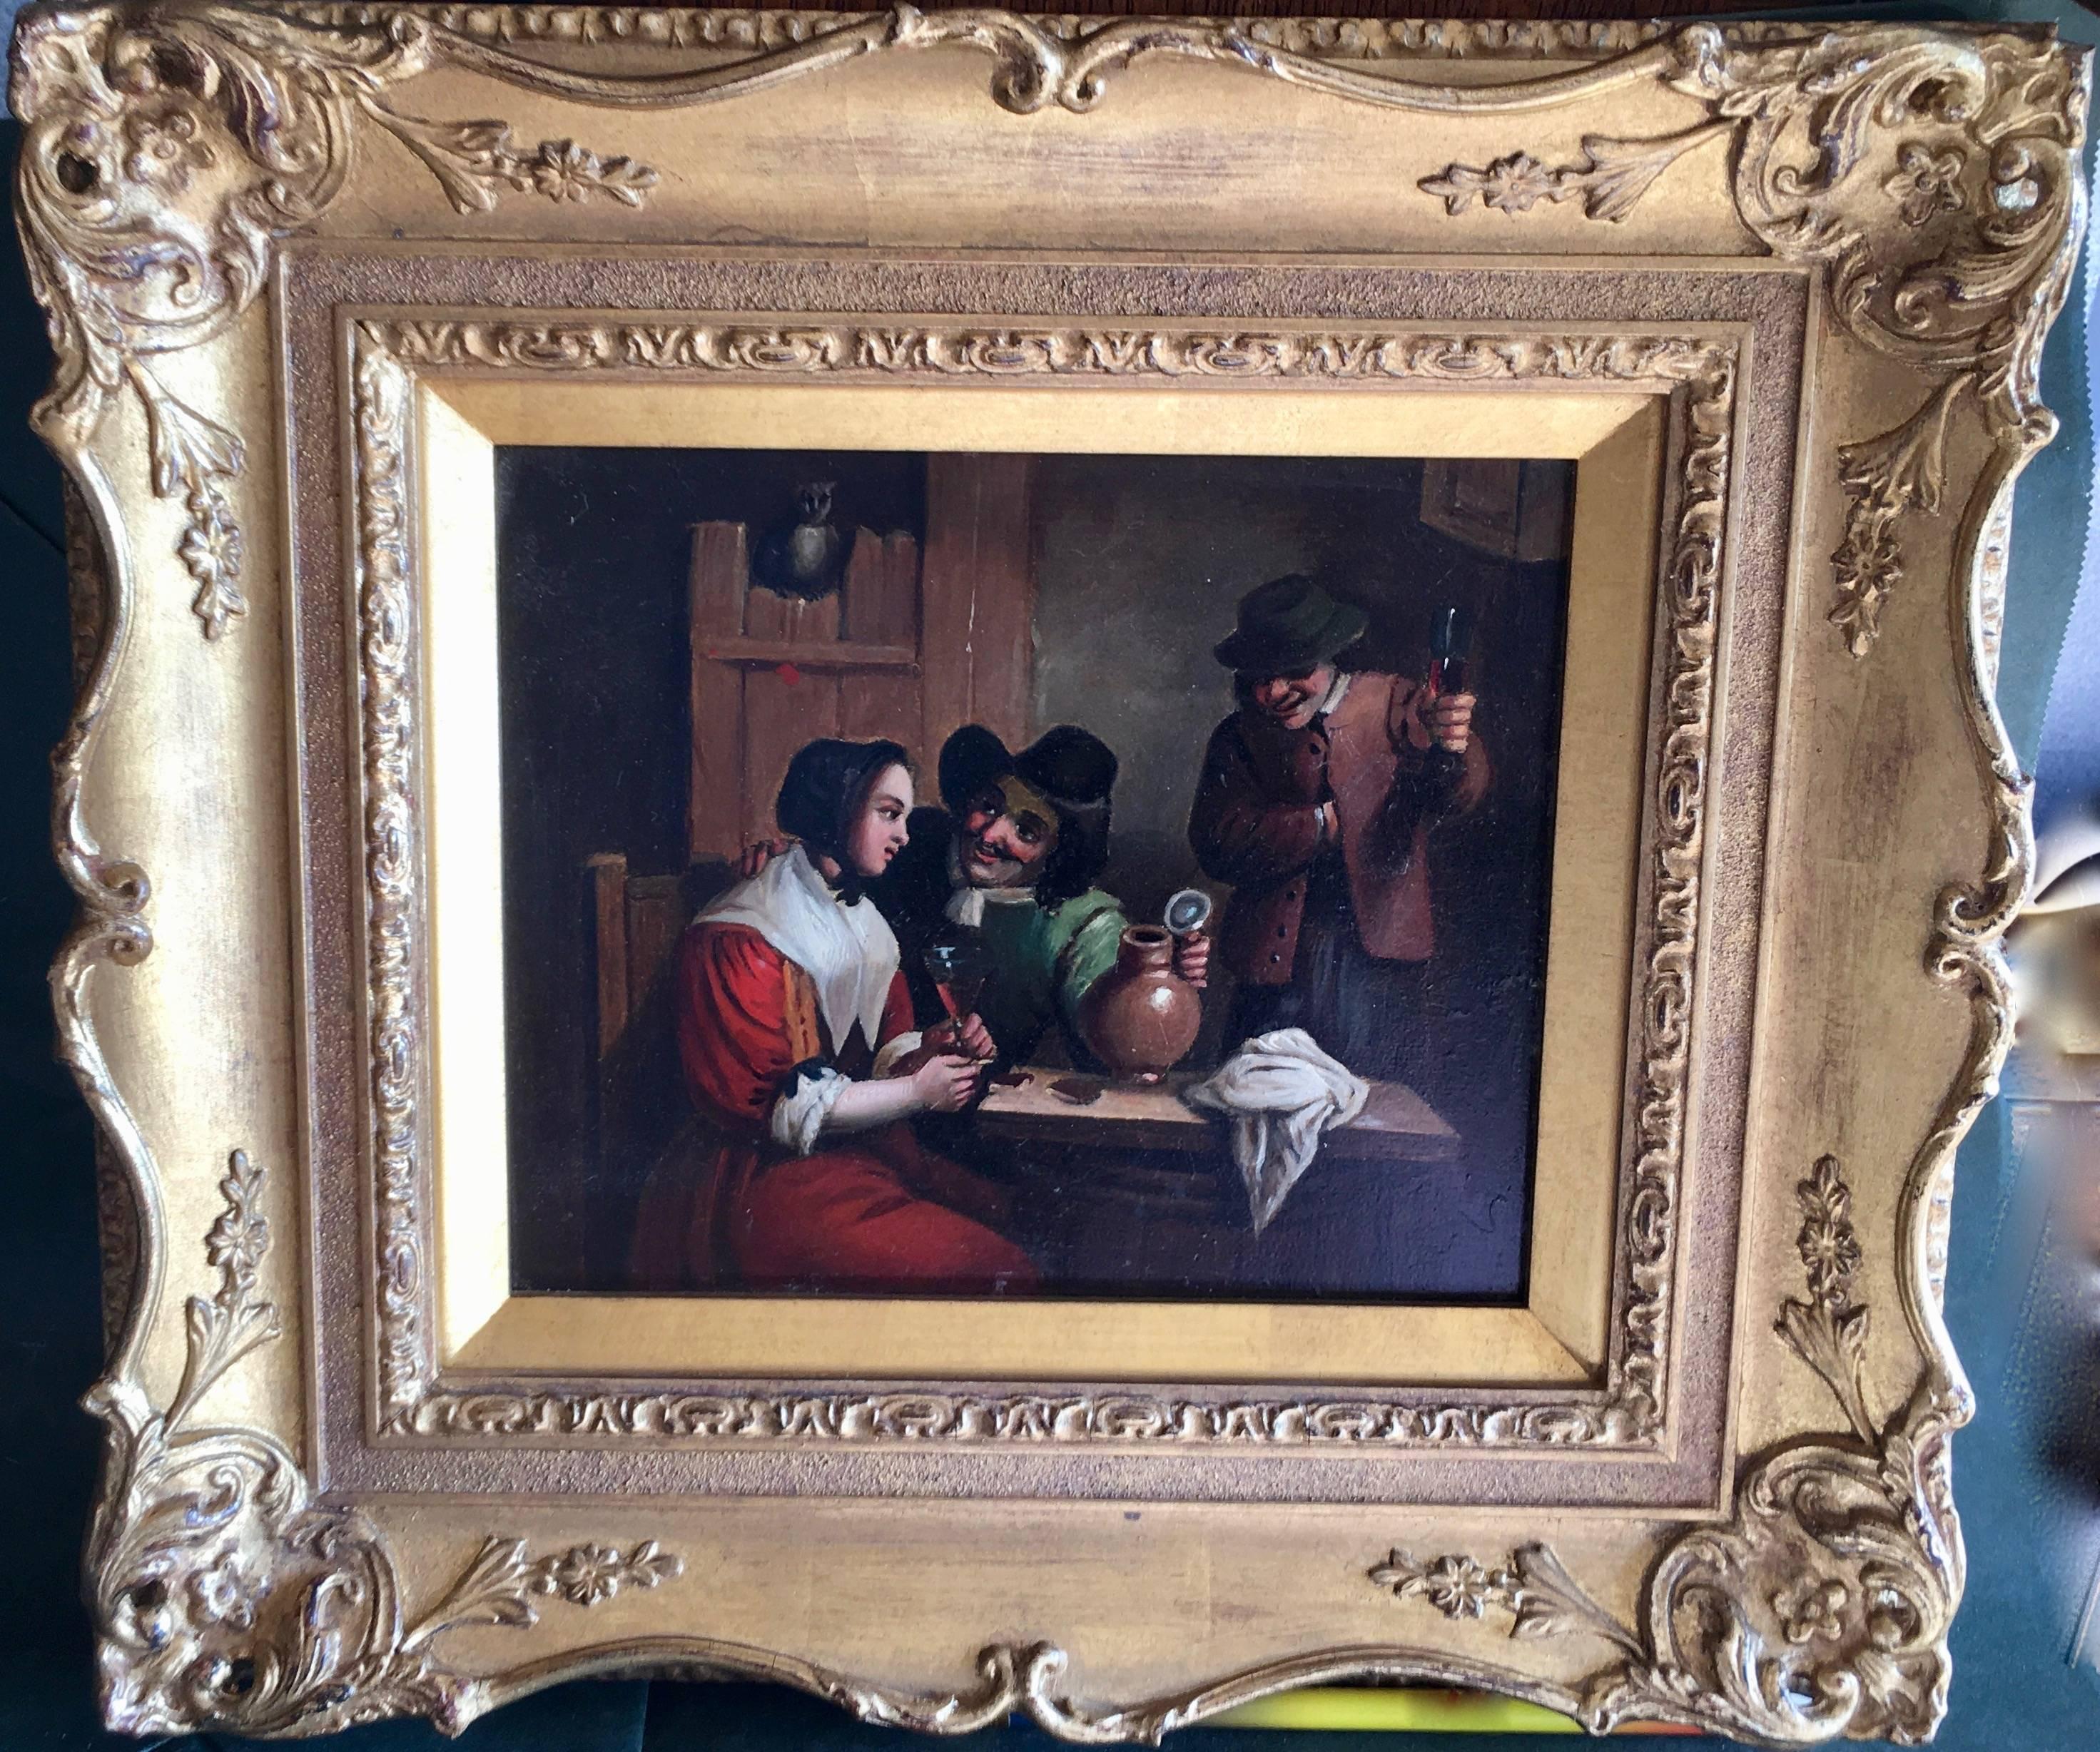 Unknown Figurative Painting - 17th century style Dutch figures in an Inn drinking at a table